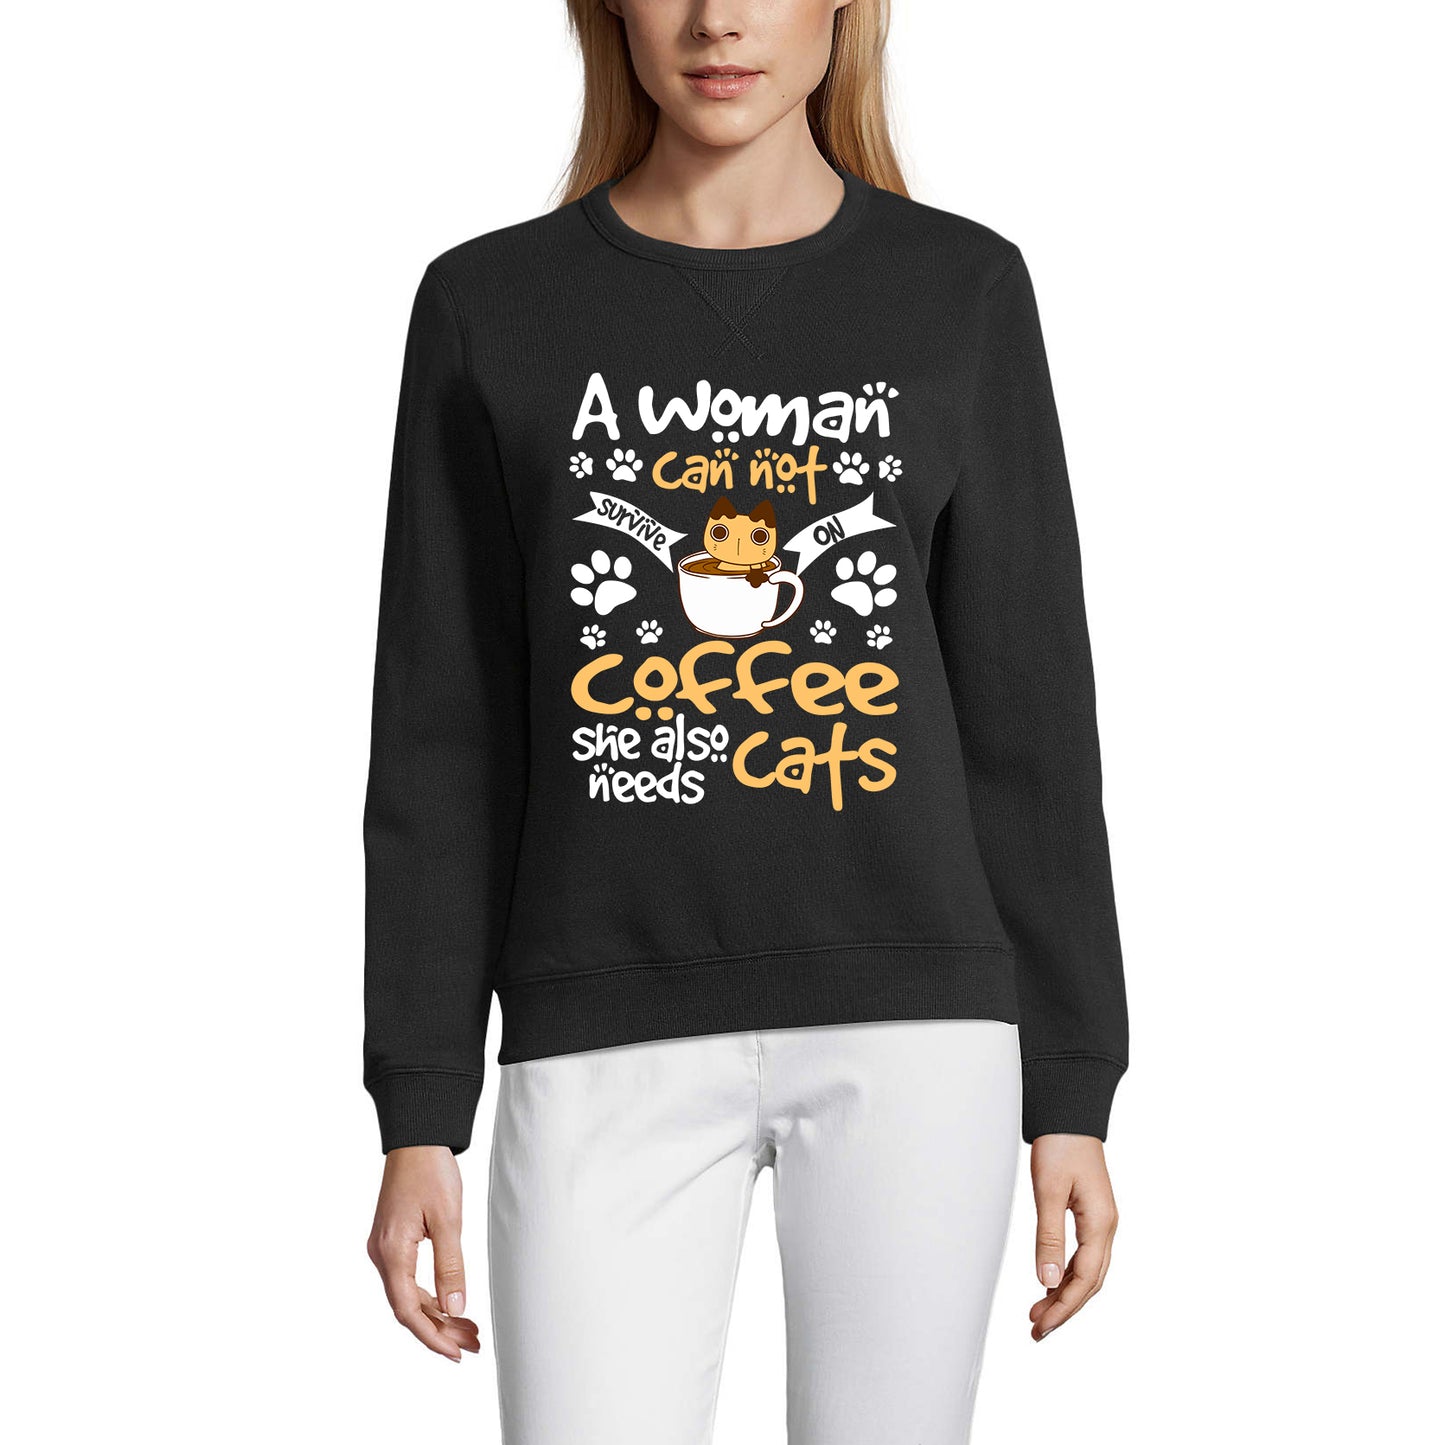 ULTRABASIC Women's Sweatshirt Can Not Survive on Coffee She Also Need Cats - Funny Kitty Sweater